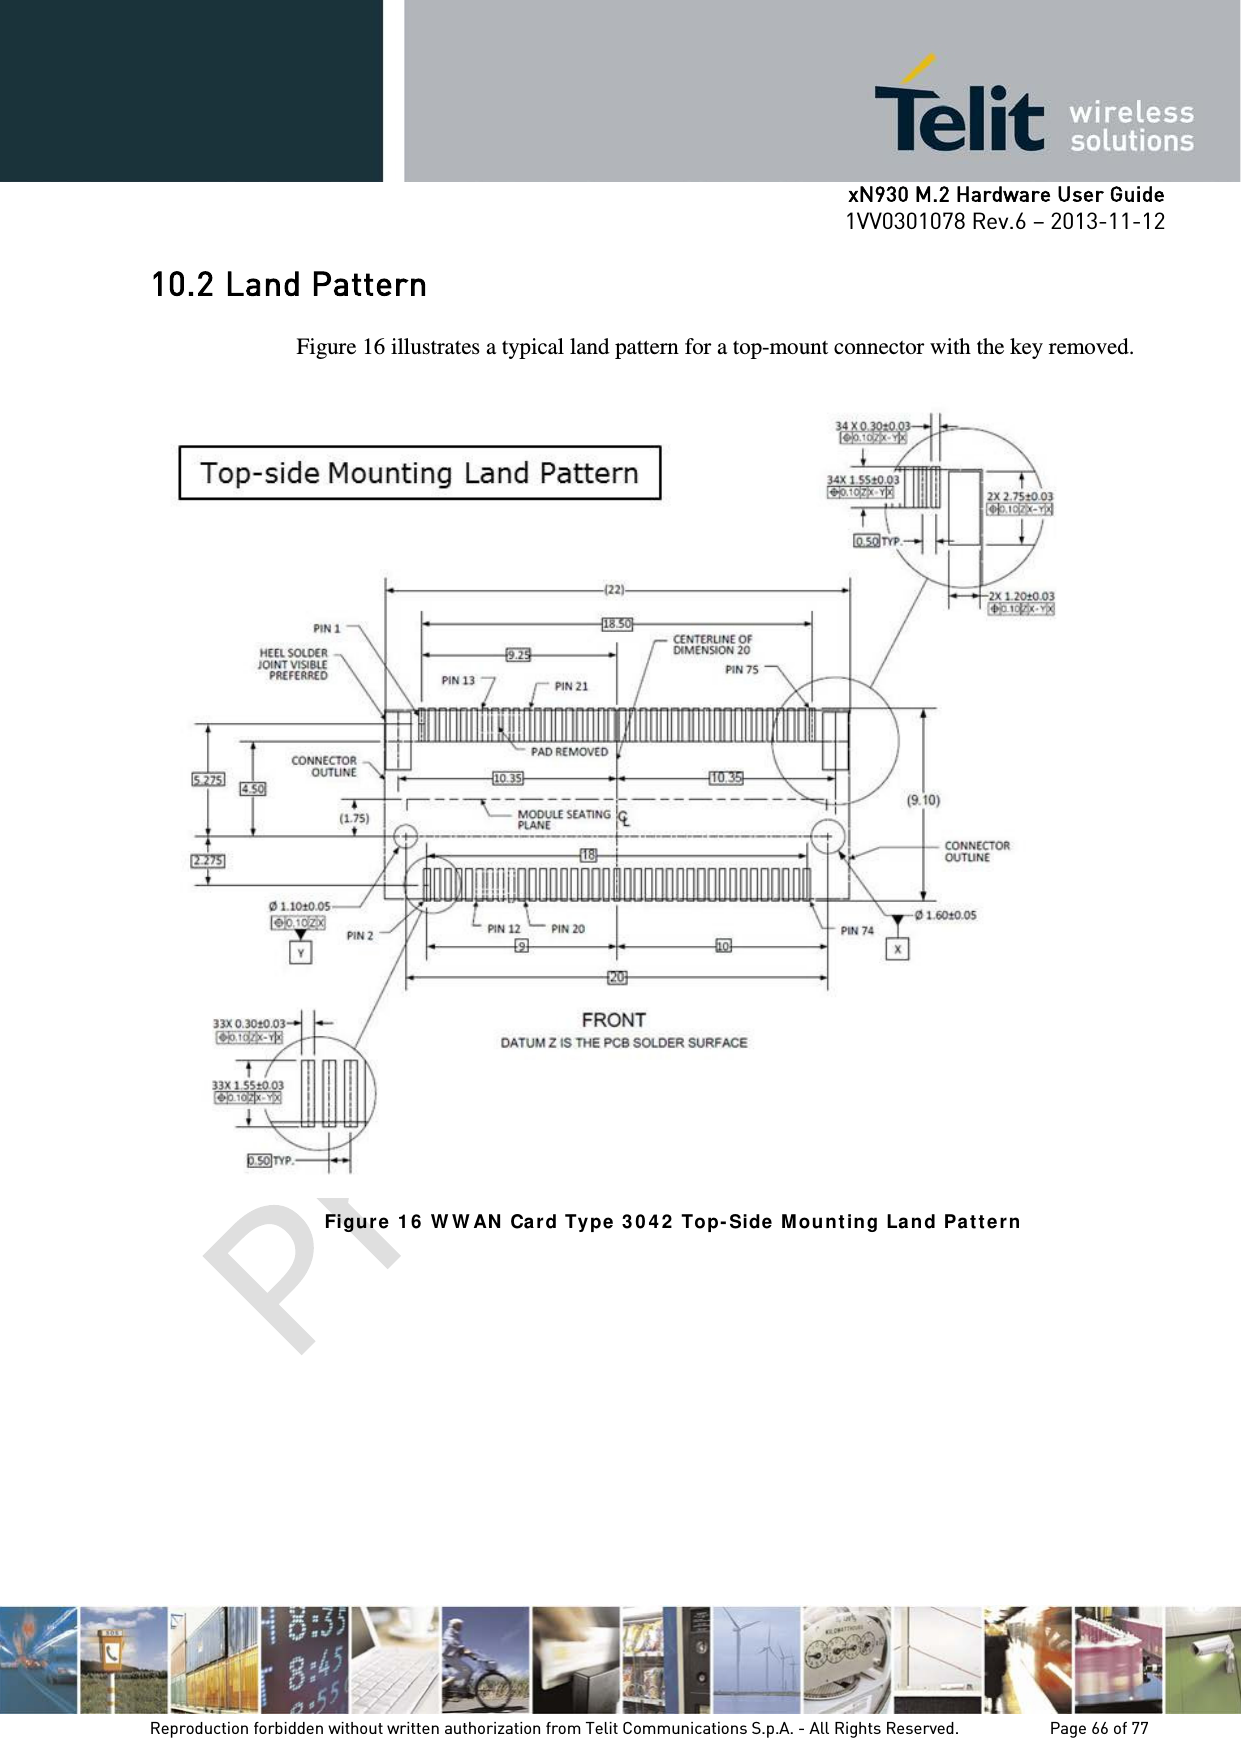      xN930 M.2 Hardware User Guide 1VV0301078 Rev.6 – 2013-11-12    10.2 Land Pattern  Figure 16 illustrates a typical land pattern for a top-mount connector with the key removed.   Figur e 1 6  W W AN  Ca rd Type  3 0 4 2  Top-Side  M ou nt ing La nd Pa t t er n     Reproduction forbidden without written authorization from Telit Communications S.p.A. - All Rights Reserved.    Page 66 of 77 